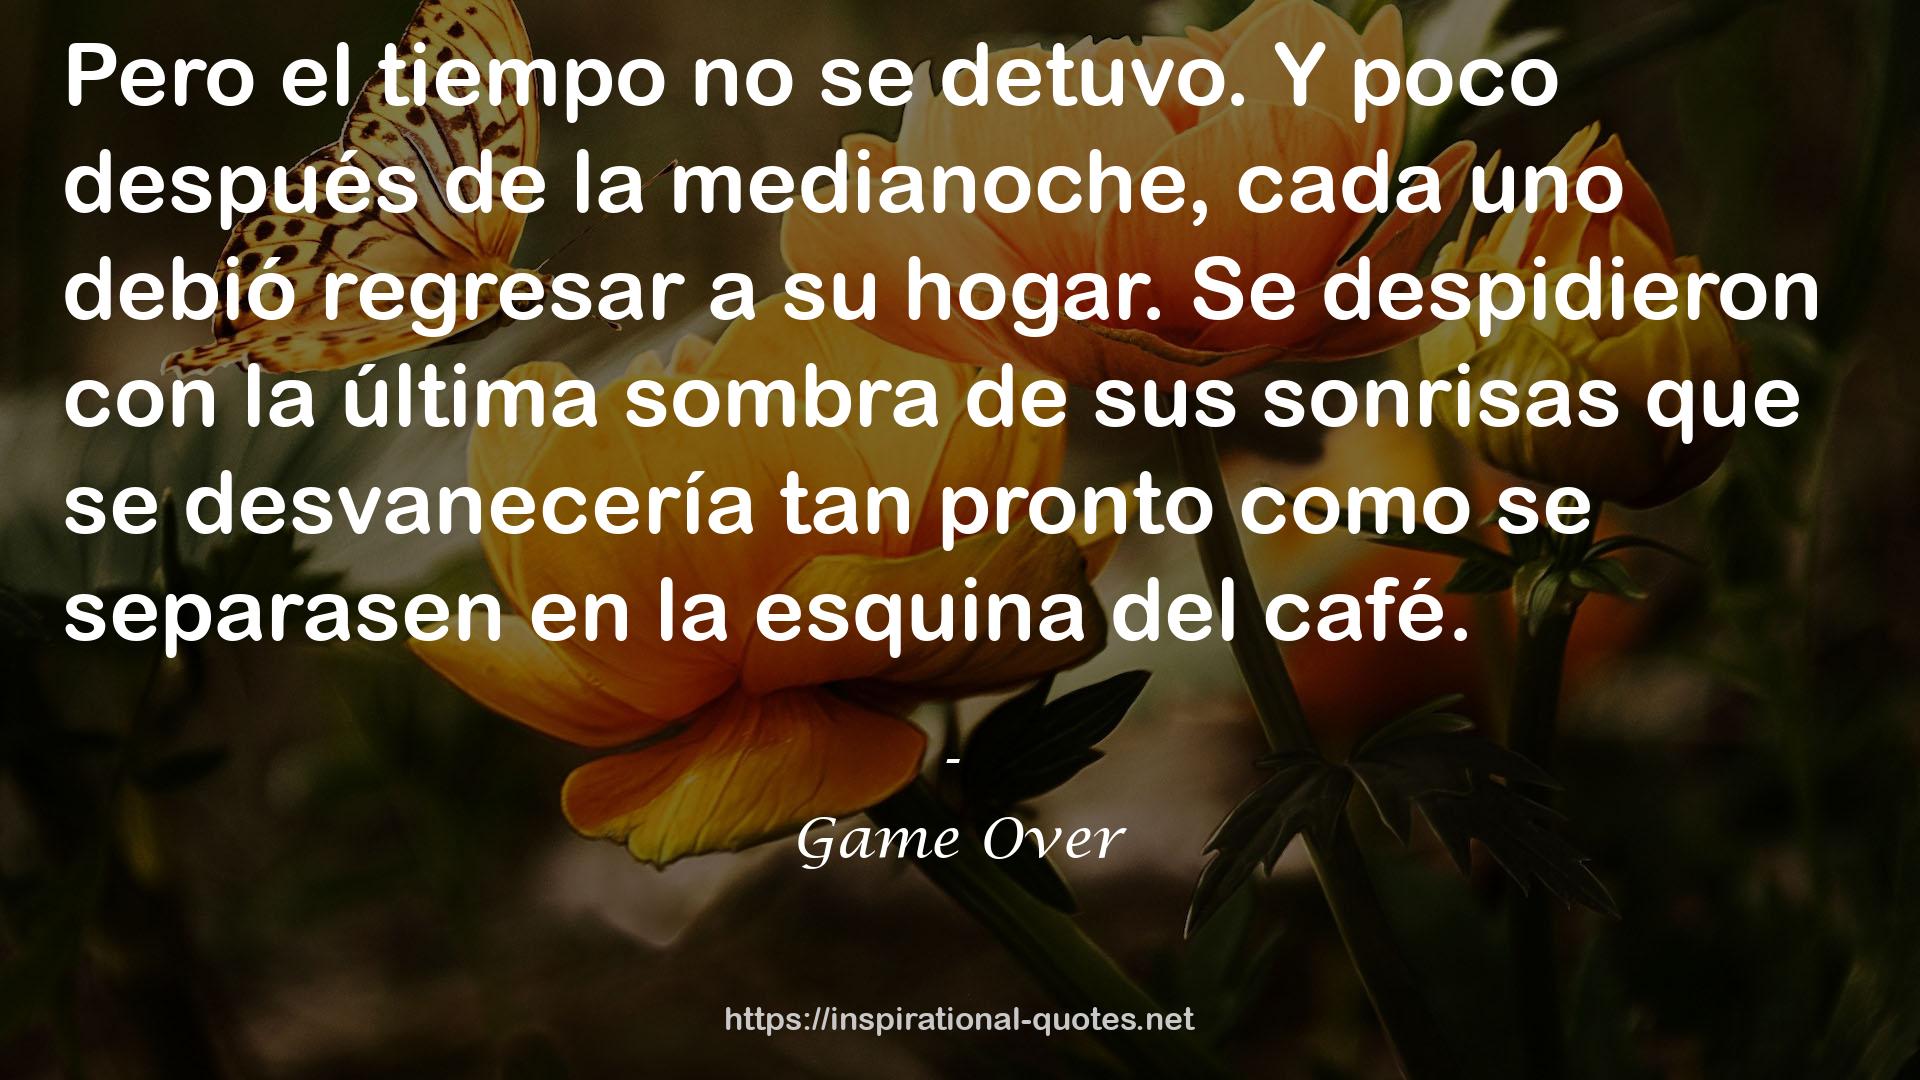 Game Over QUOTES